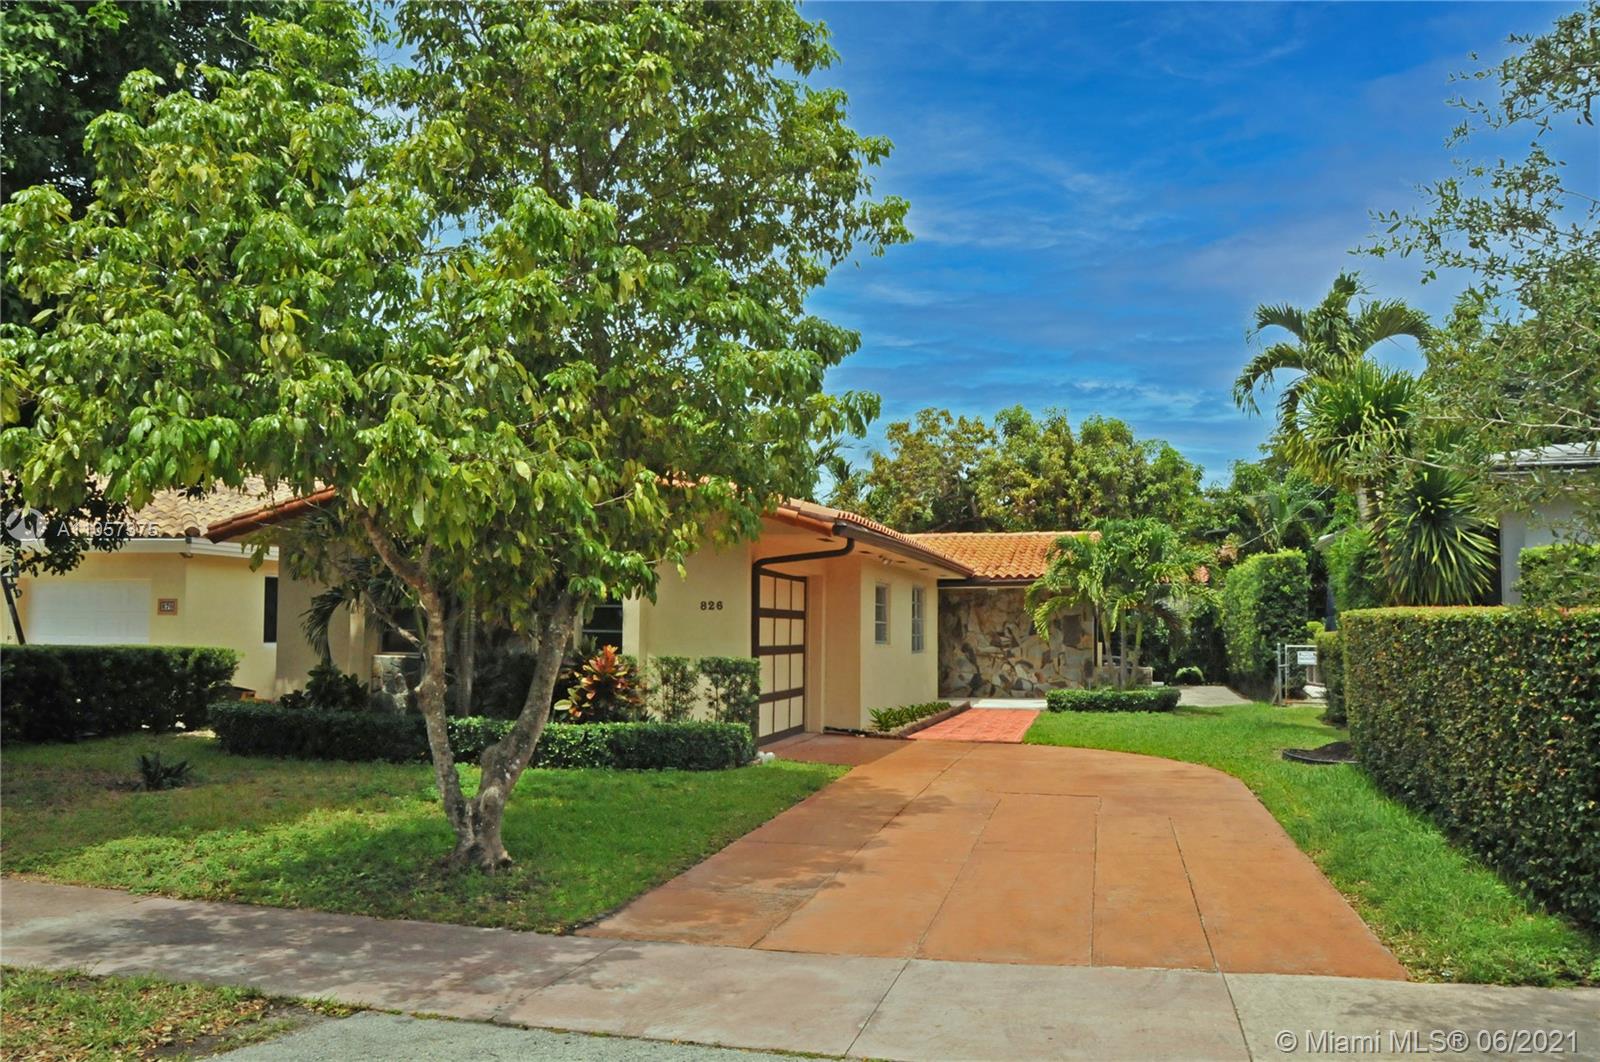 Photo 1 of 826 Capri St in Coral Gables - MLS A11057375